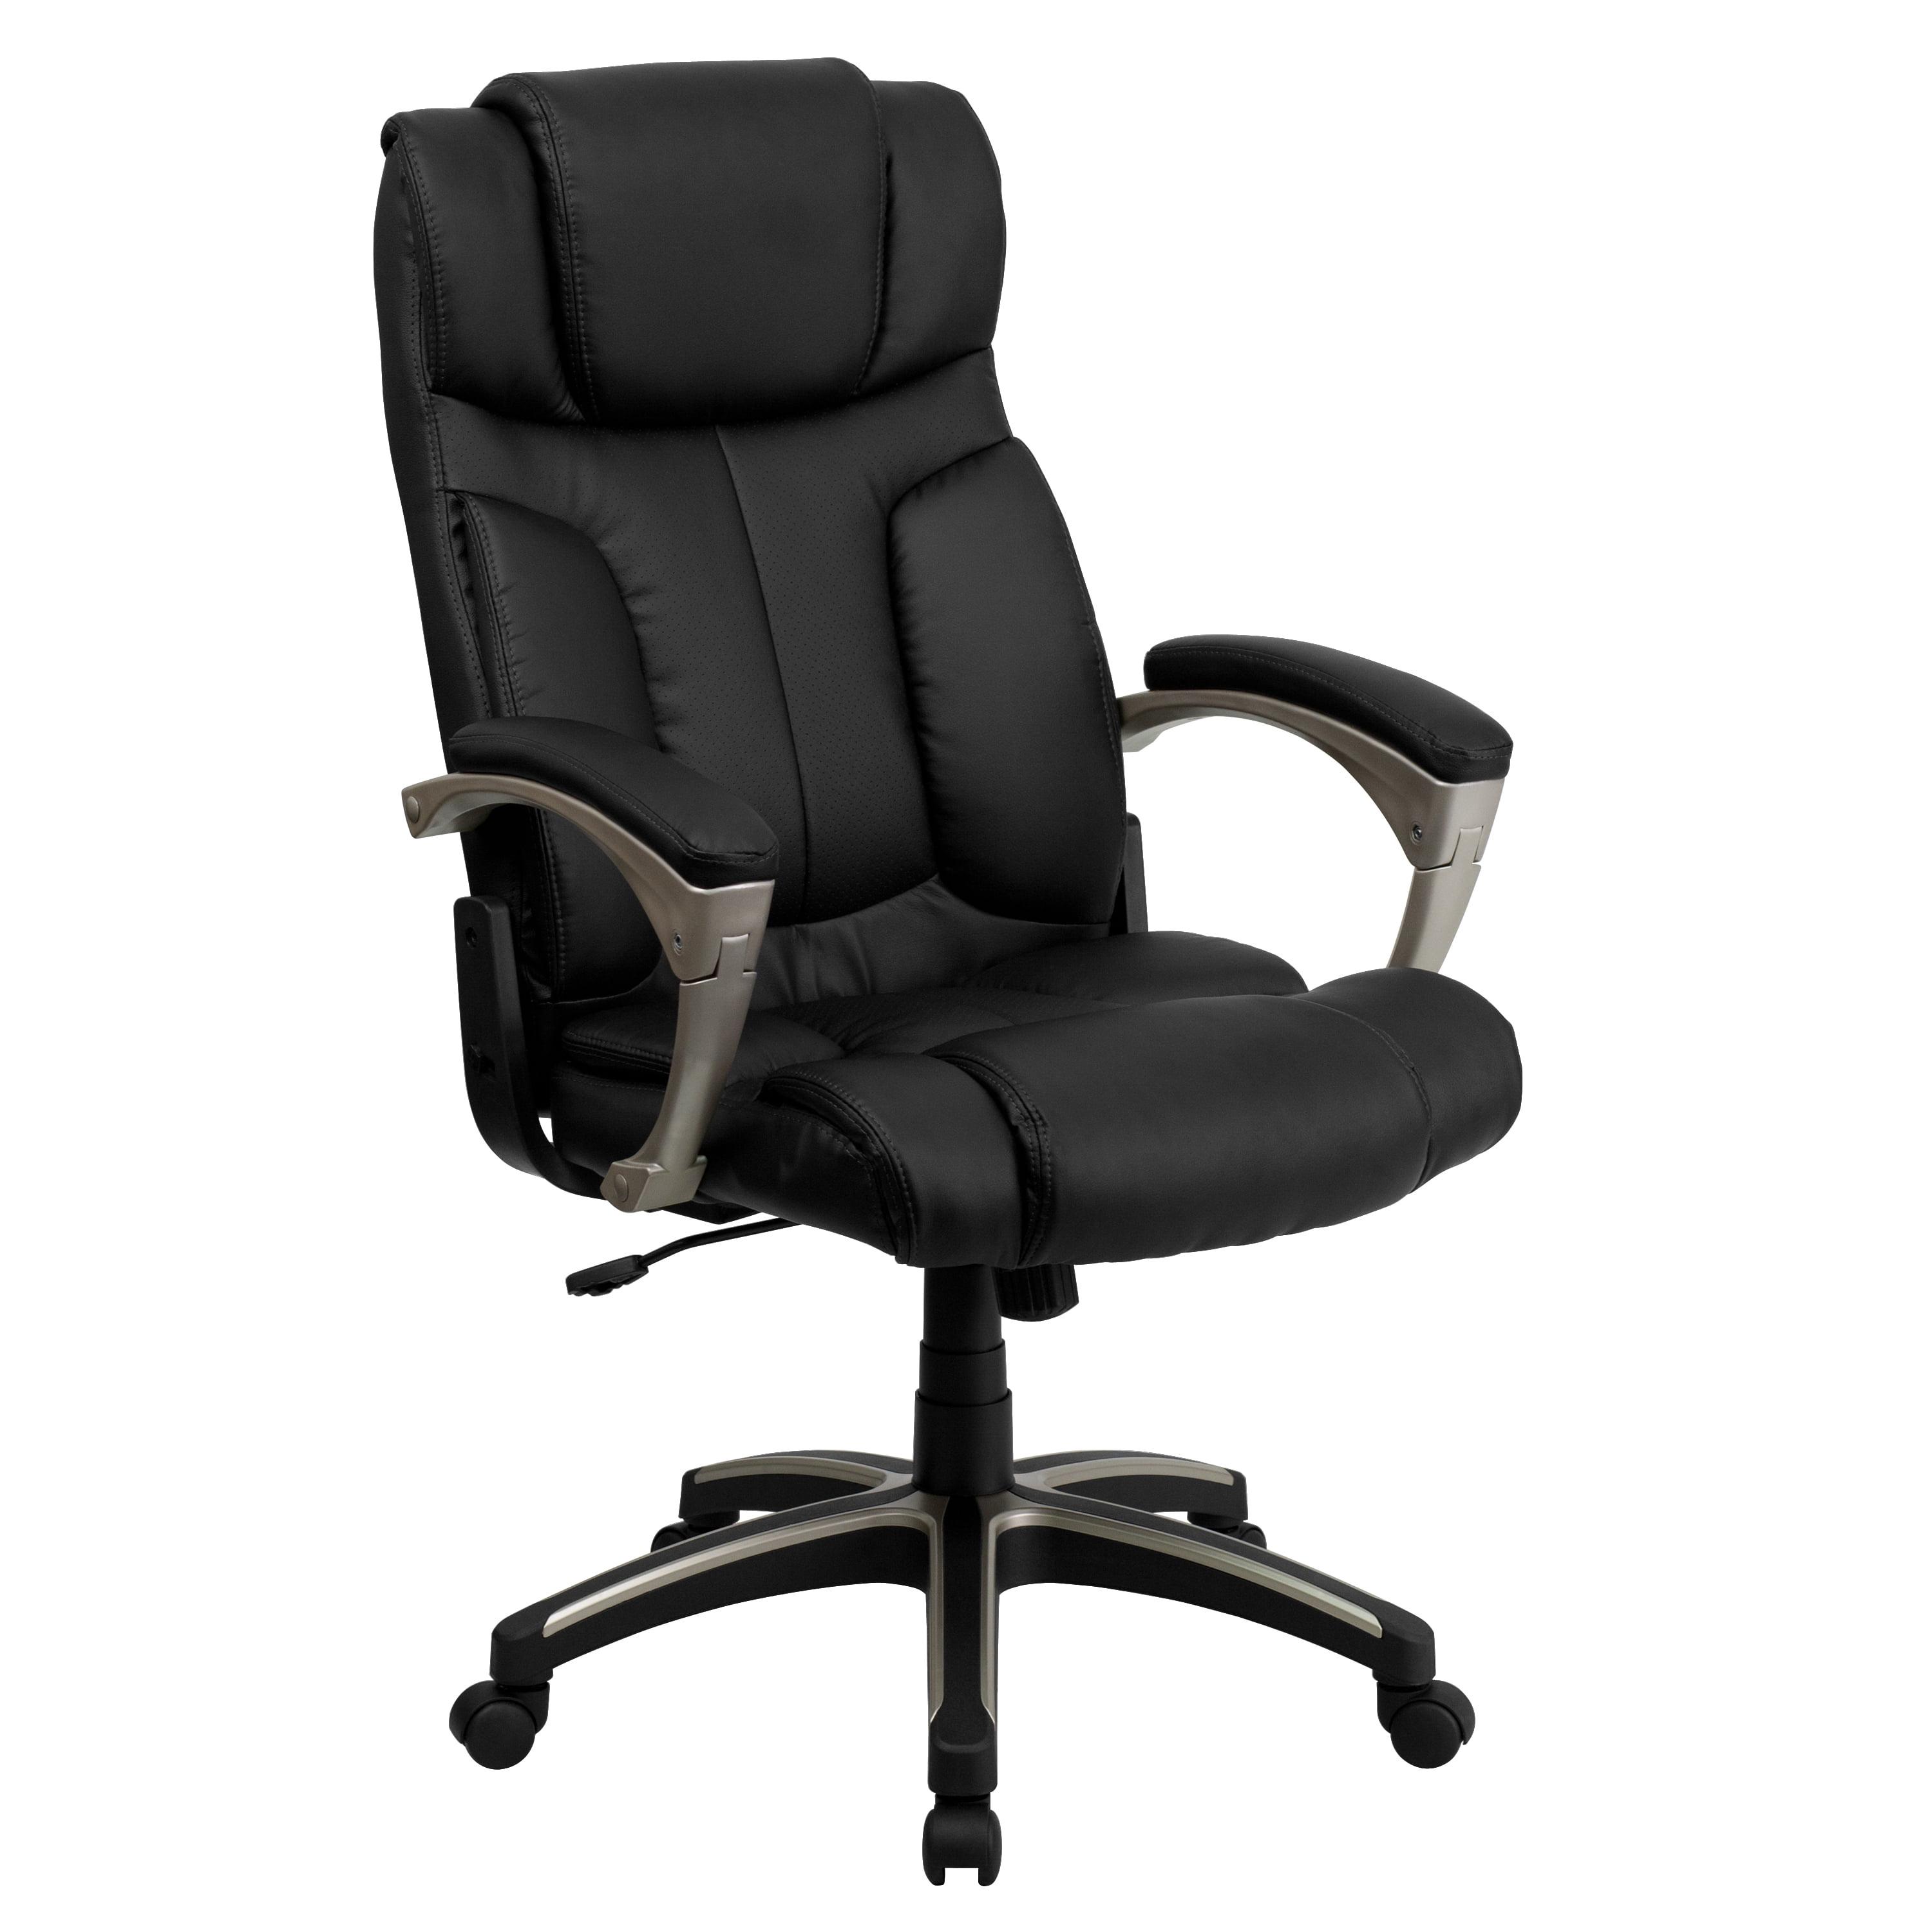 Ergonomic High Back Black LeatherSoft Executive Swivel Chair with Fixed Arms